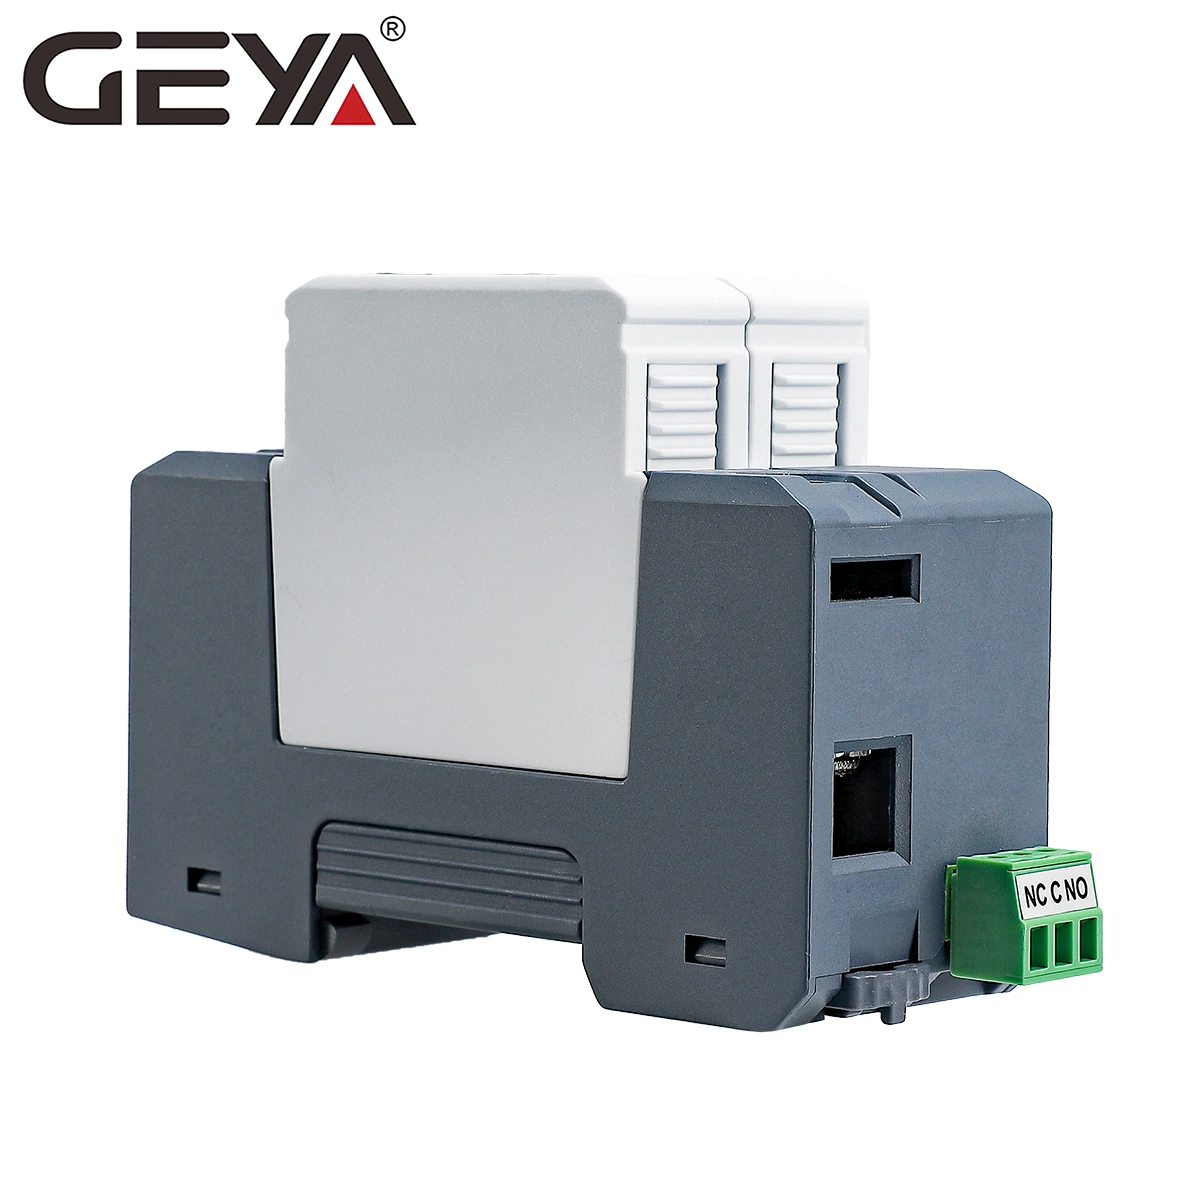 Geya Protection Consumer Unit T1+T2 Zhe Arrester Price Surge Protector